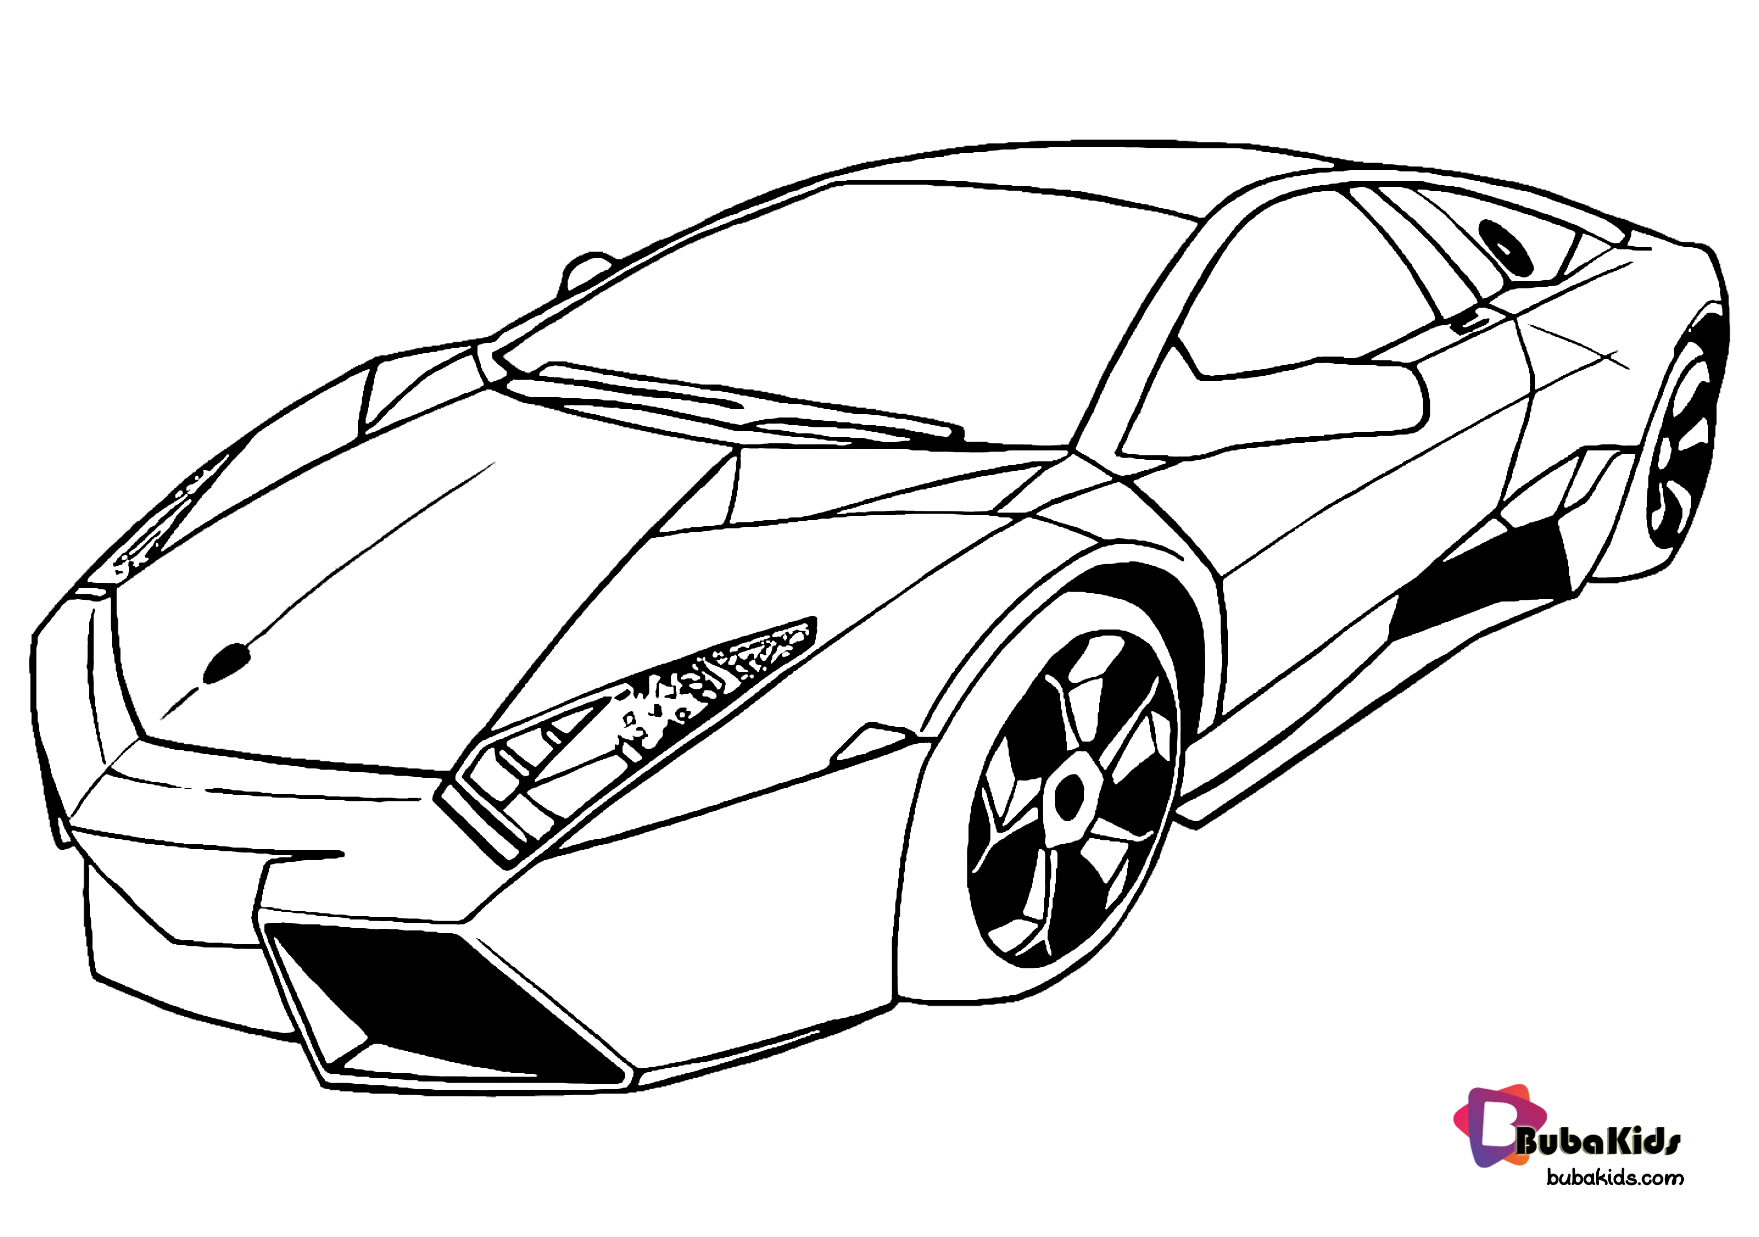 Free Download And Printable Super Car Coloring Page In 2020. Cars